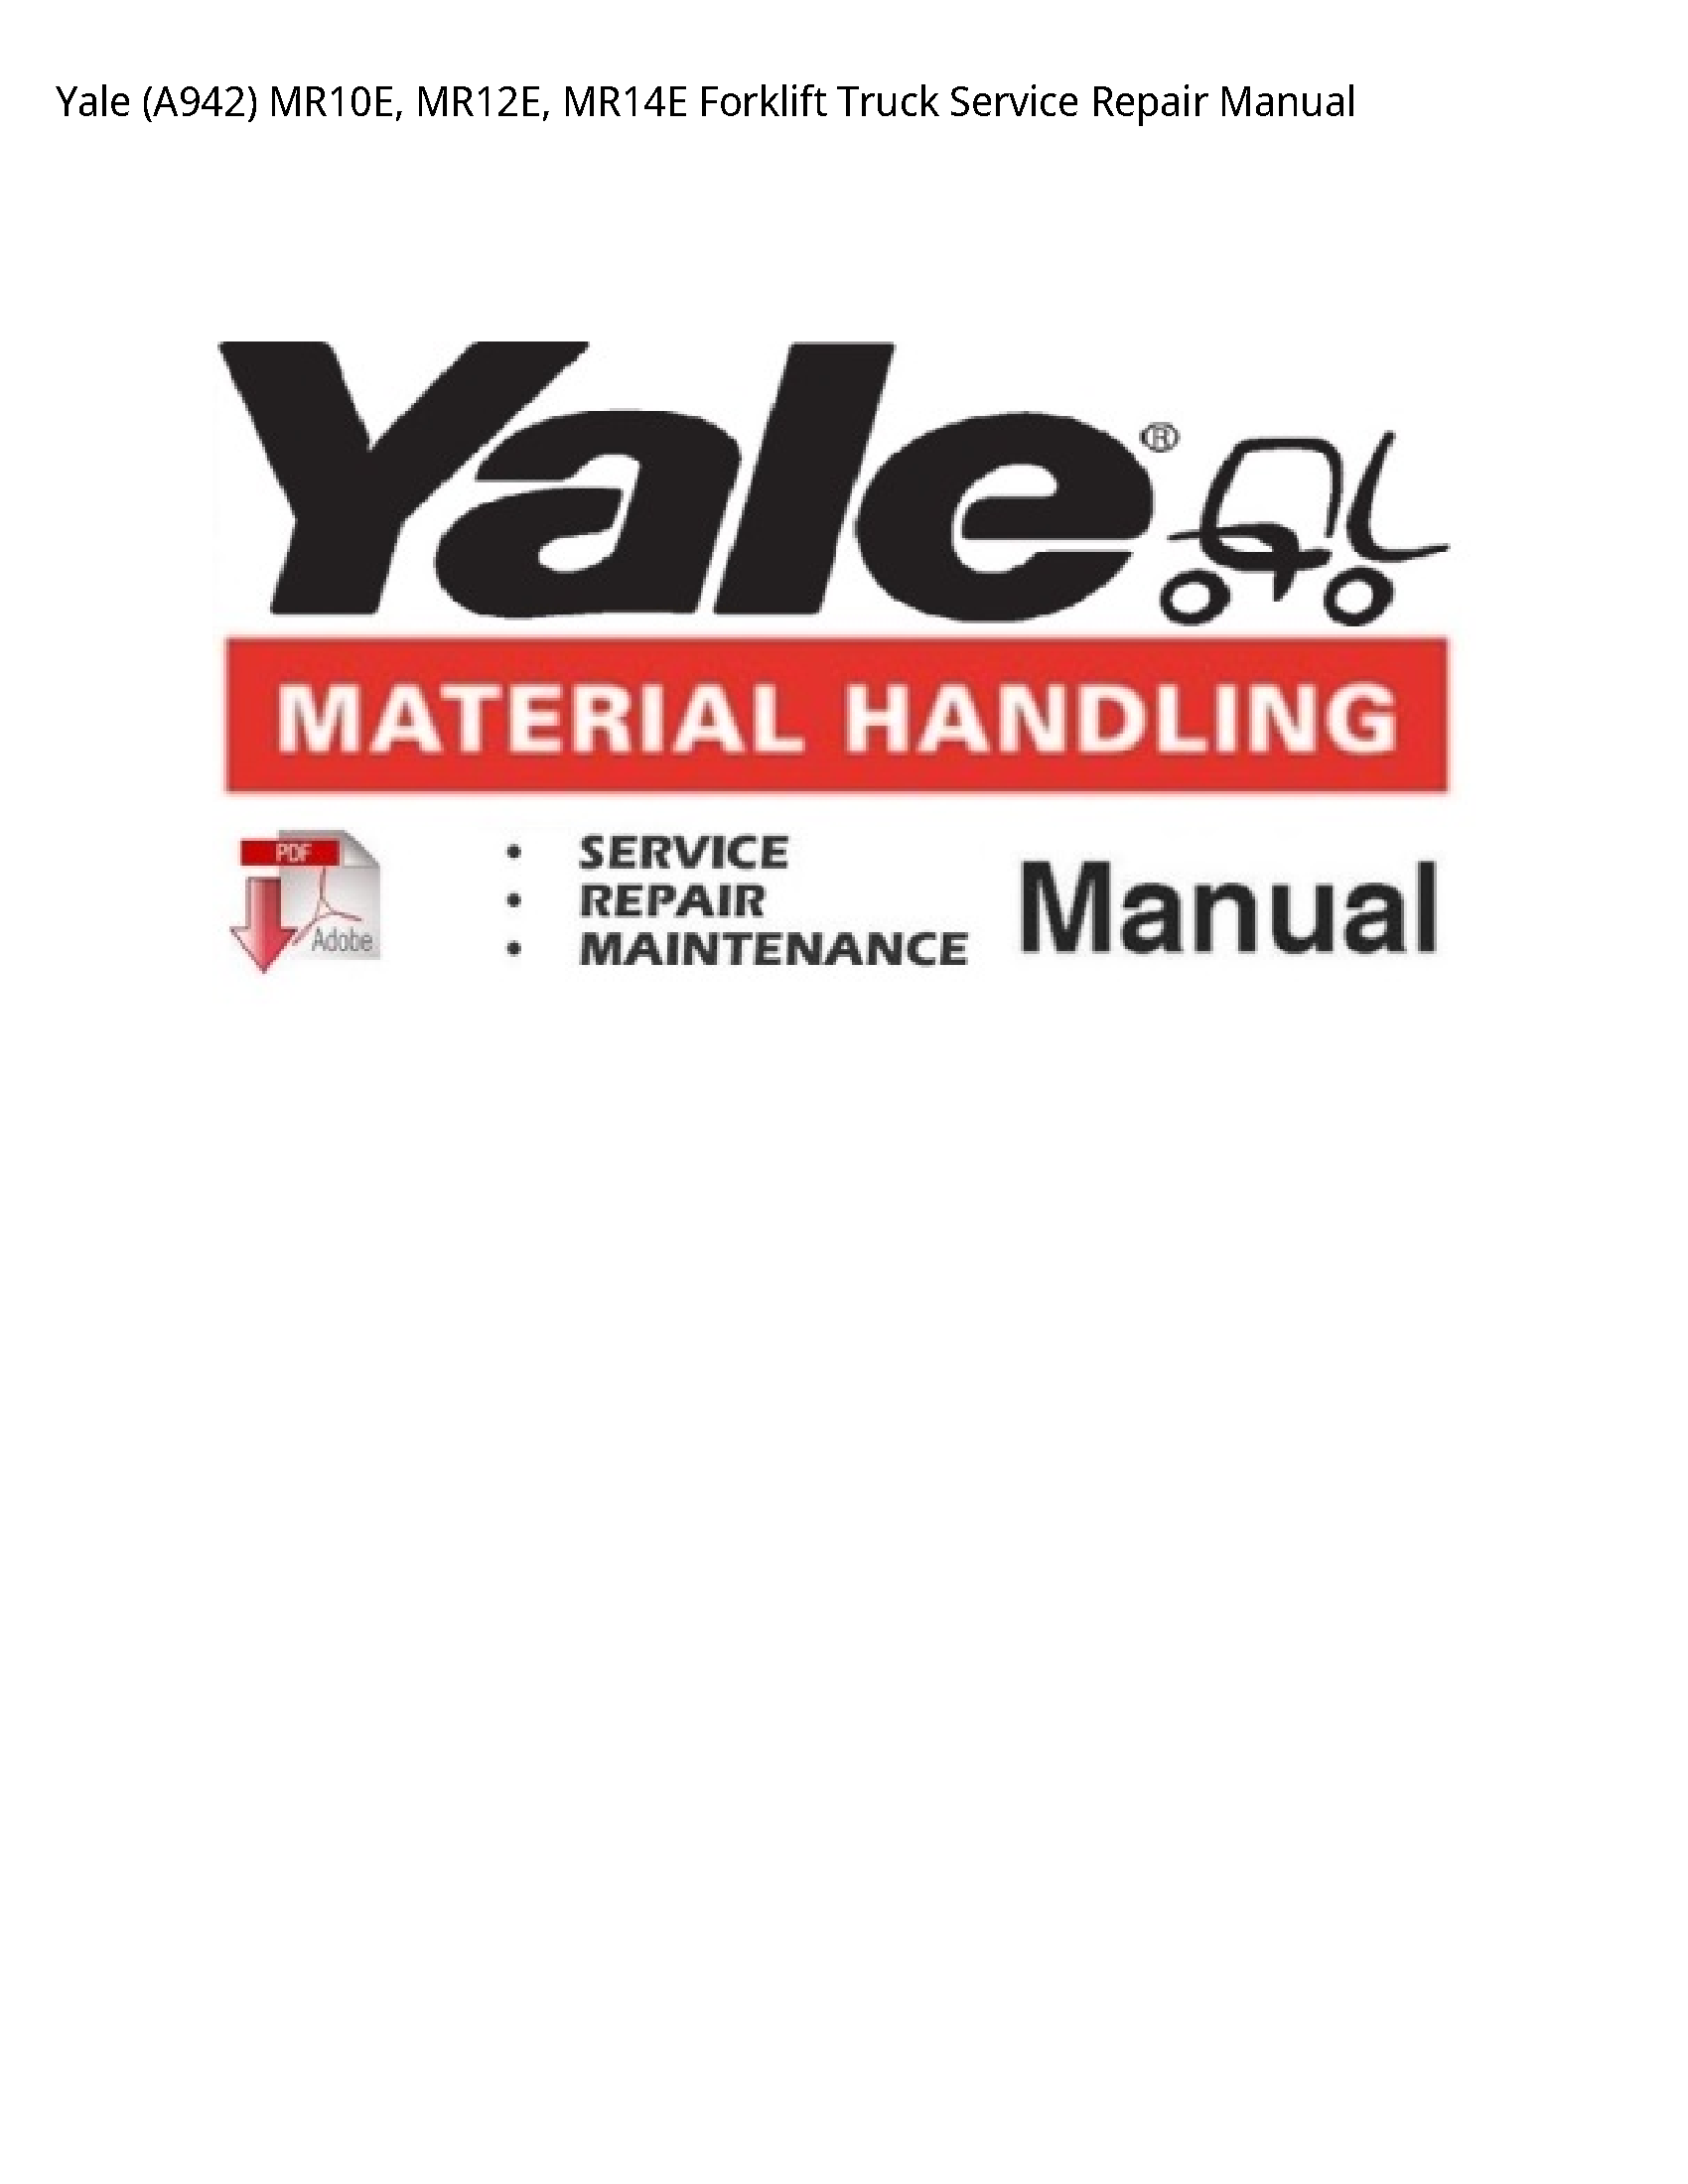 Yale (A942) Forklift Truck manual